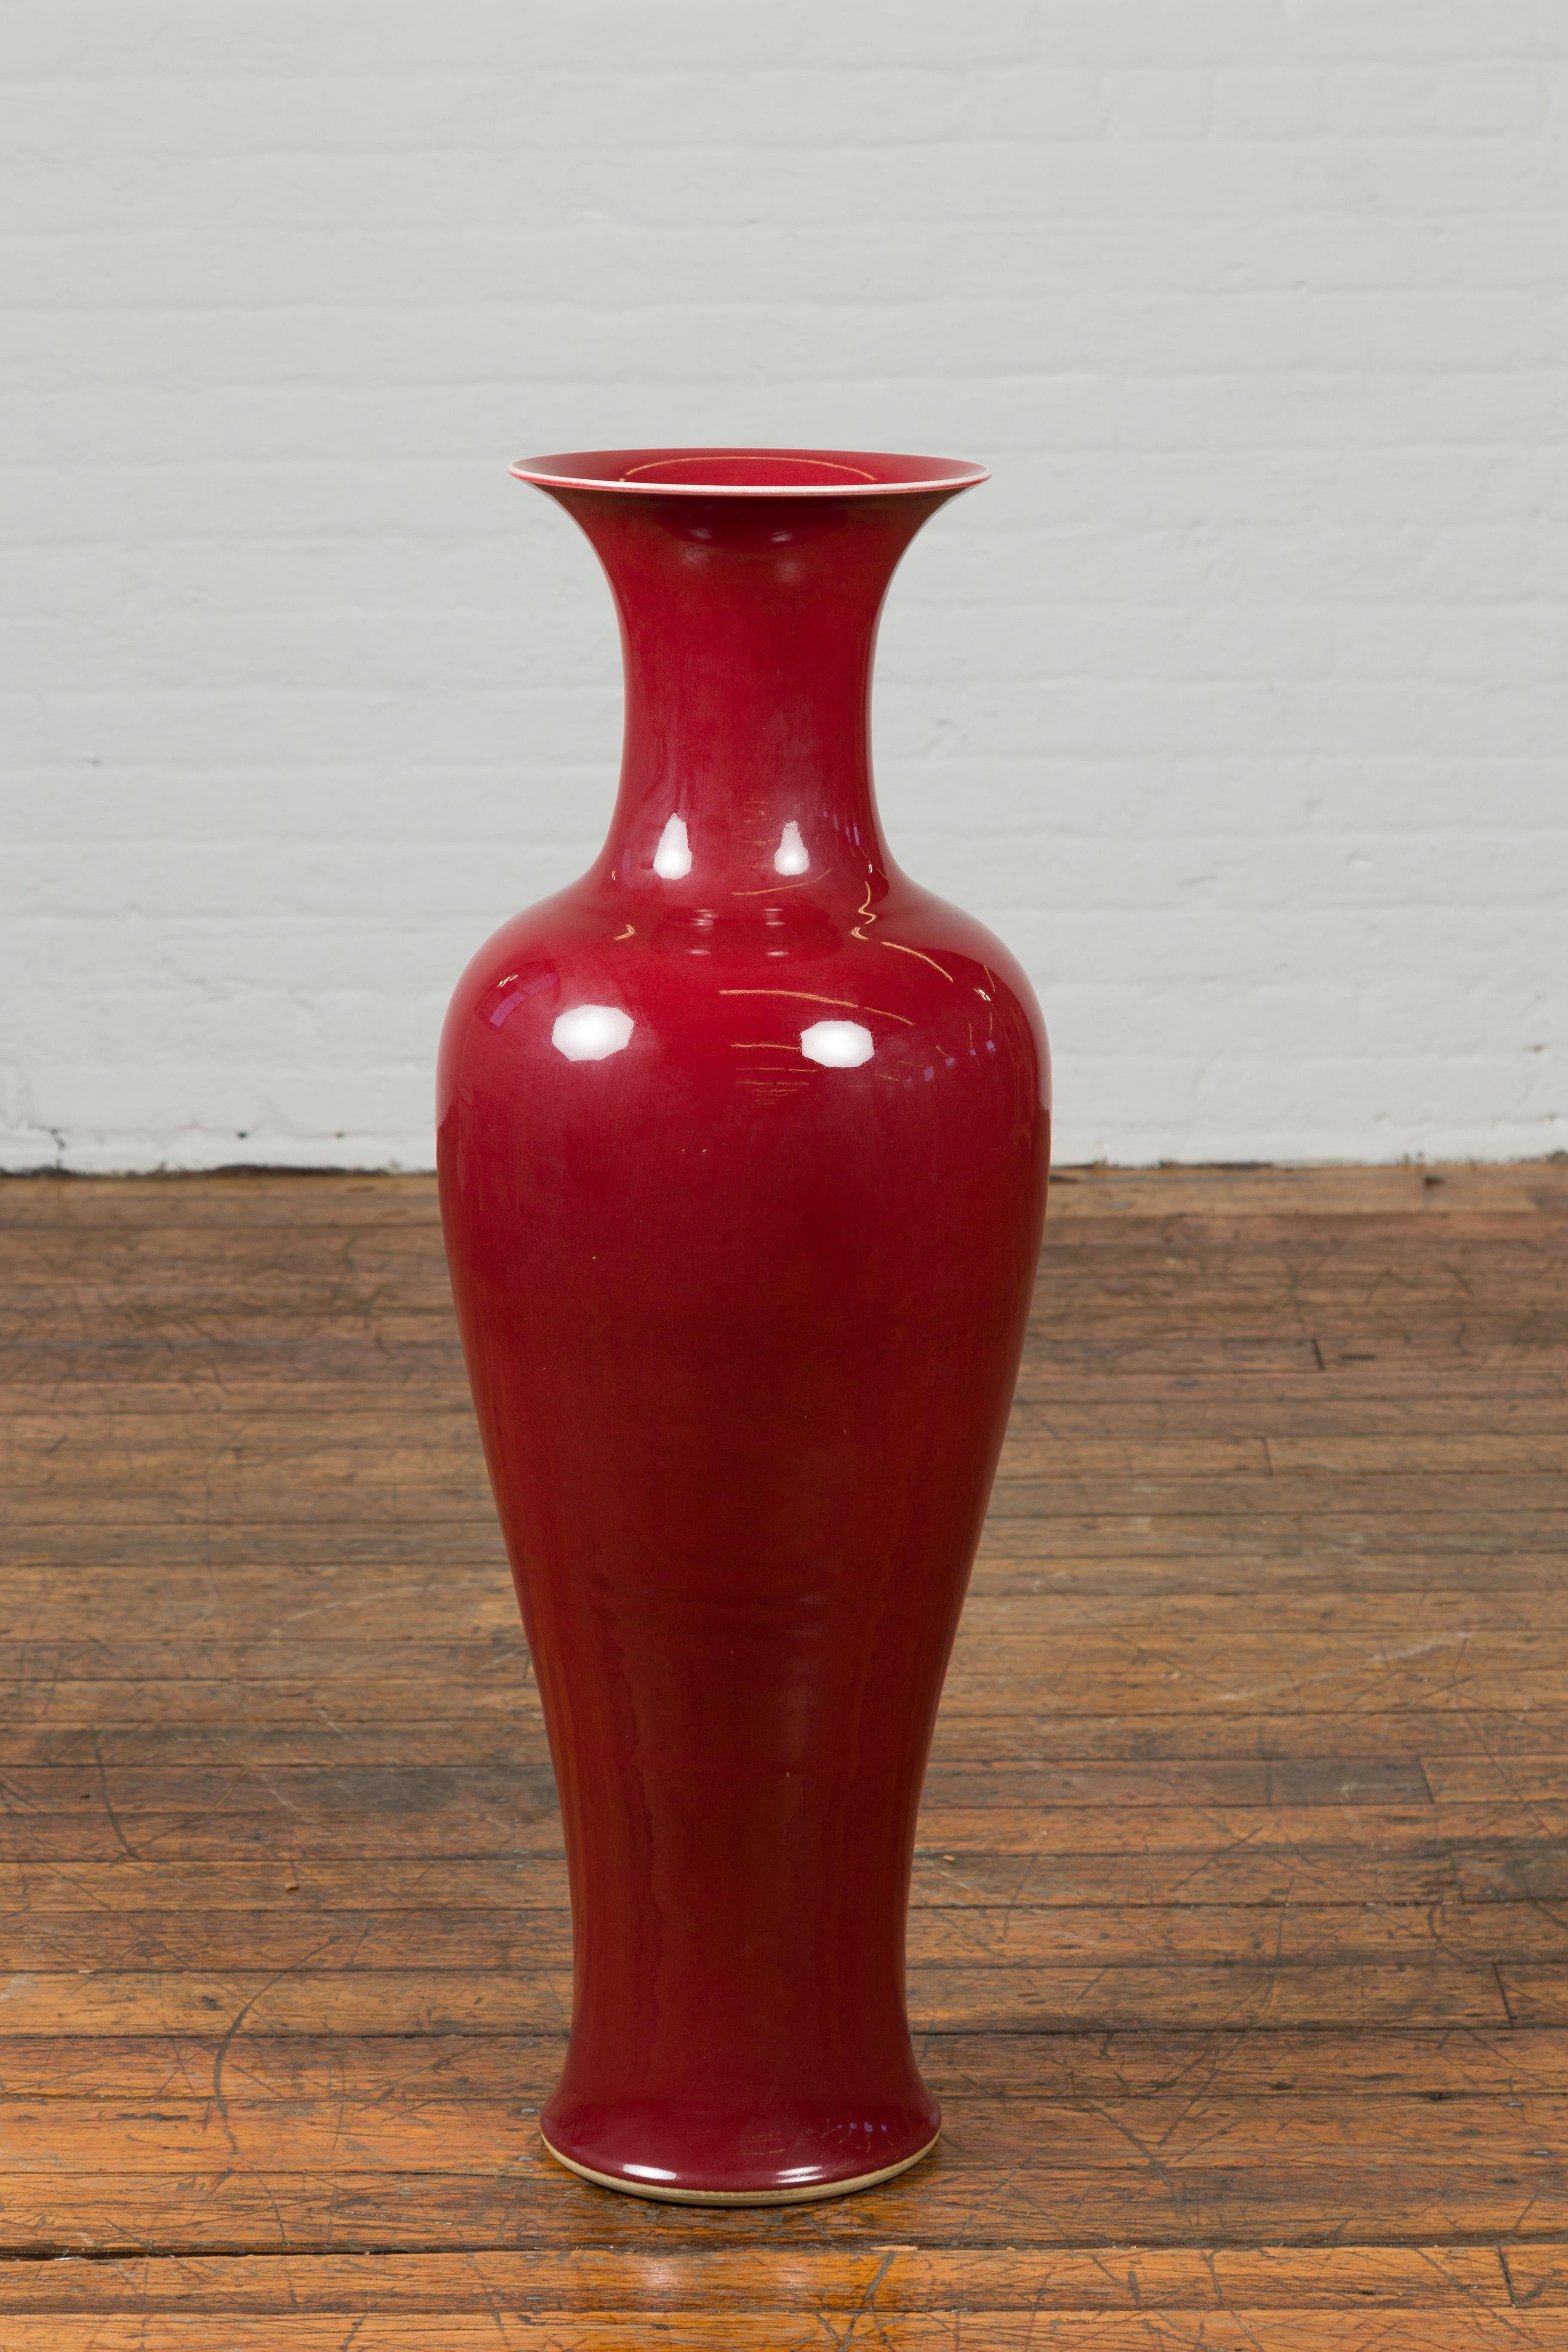 A Chinese vintage oxblood altar vase from the mid-20th century, with flaring neck. We currently have several available, priced and sold $1,300 each. Created in China during the midcentury period, this altar vase attracts our attention with its